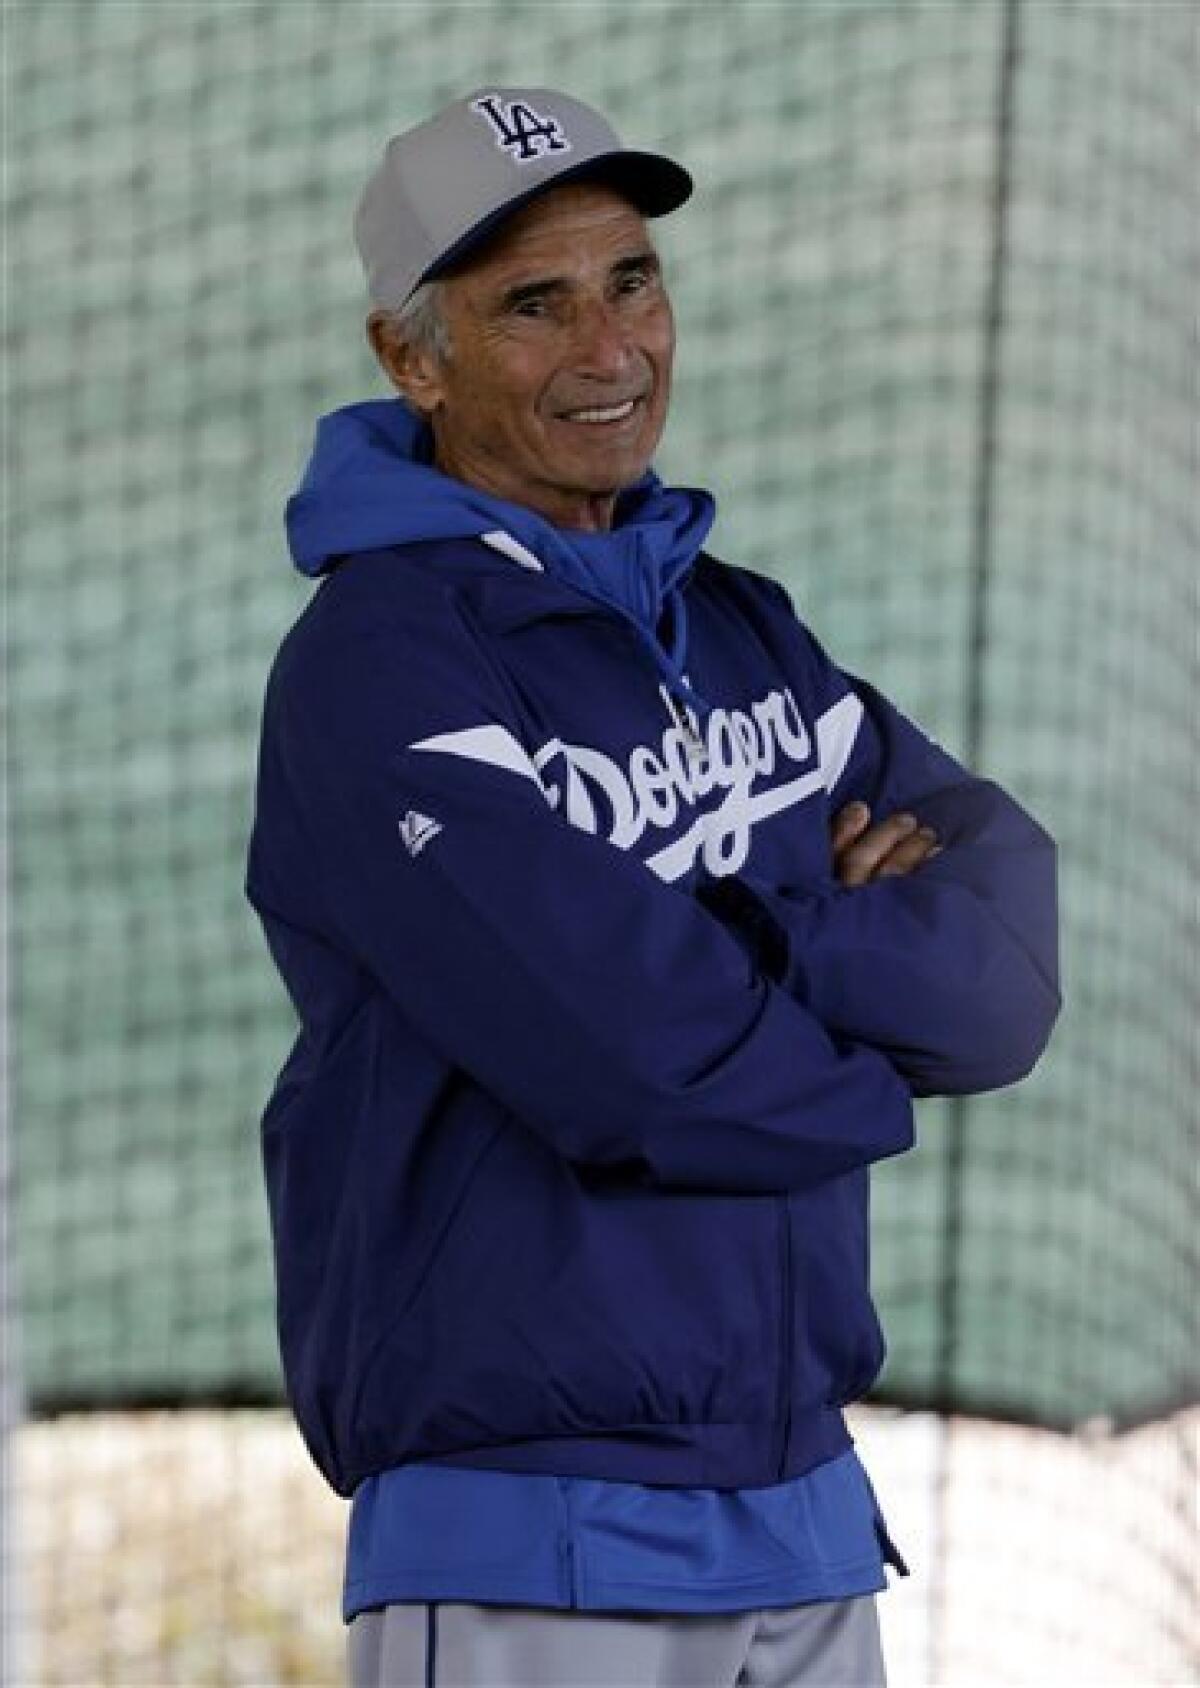 Hall of Fame Pitcher Sandy Koufax with the Los Angeles Dodgers in